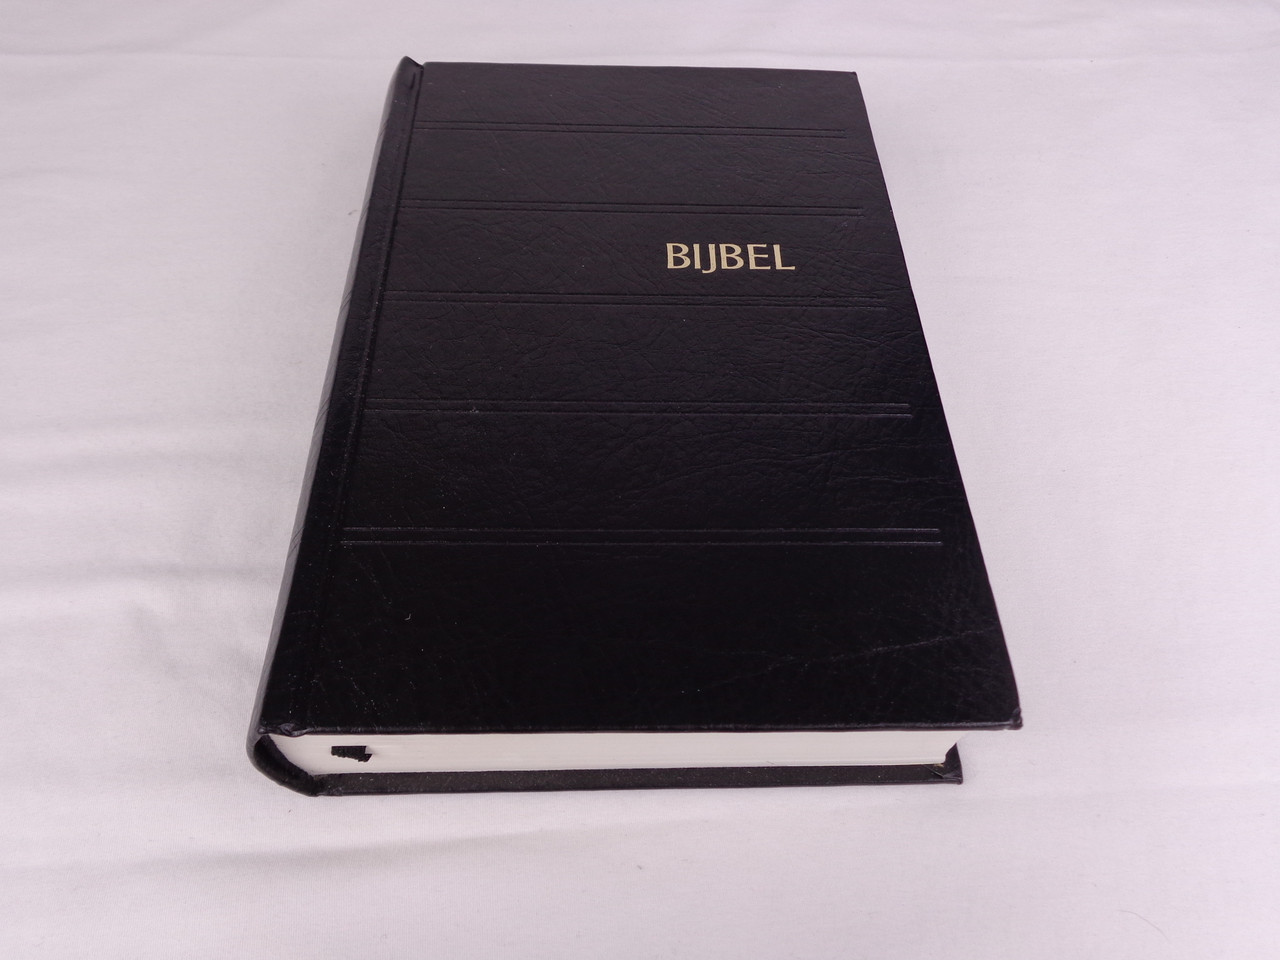 The Holy Bible in Dutch - Bijbel / Black Hardcover Edition ...